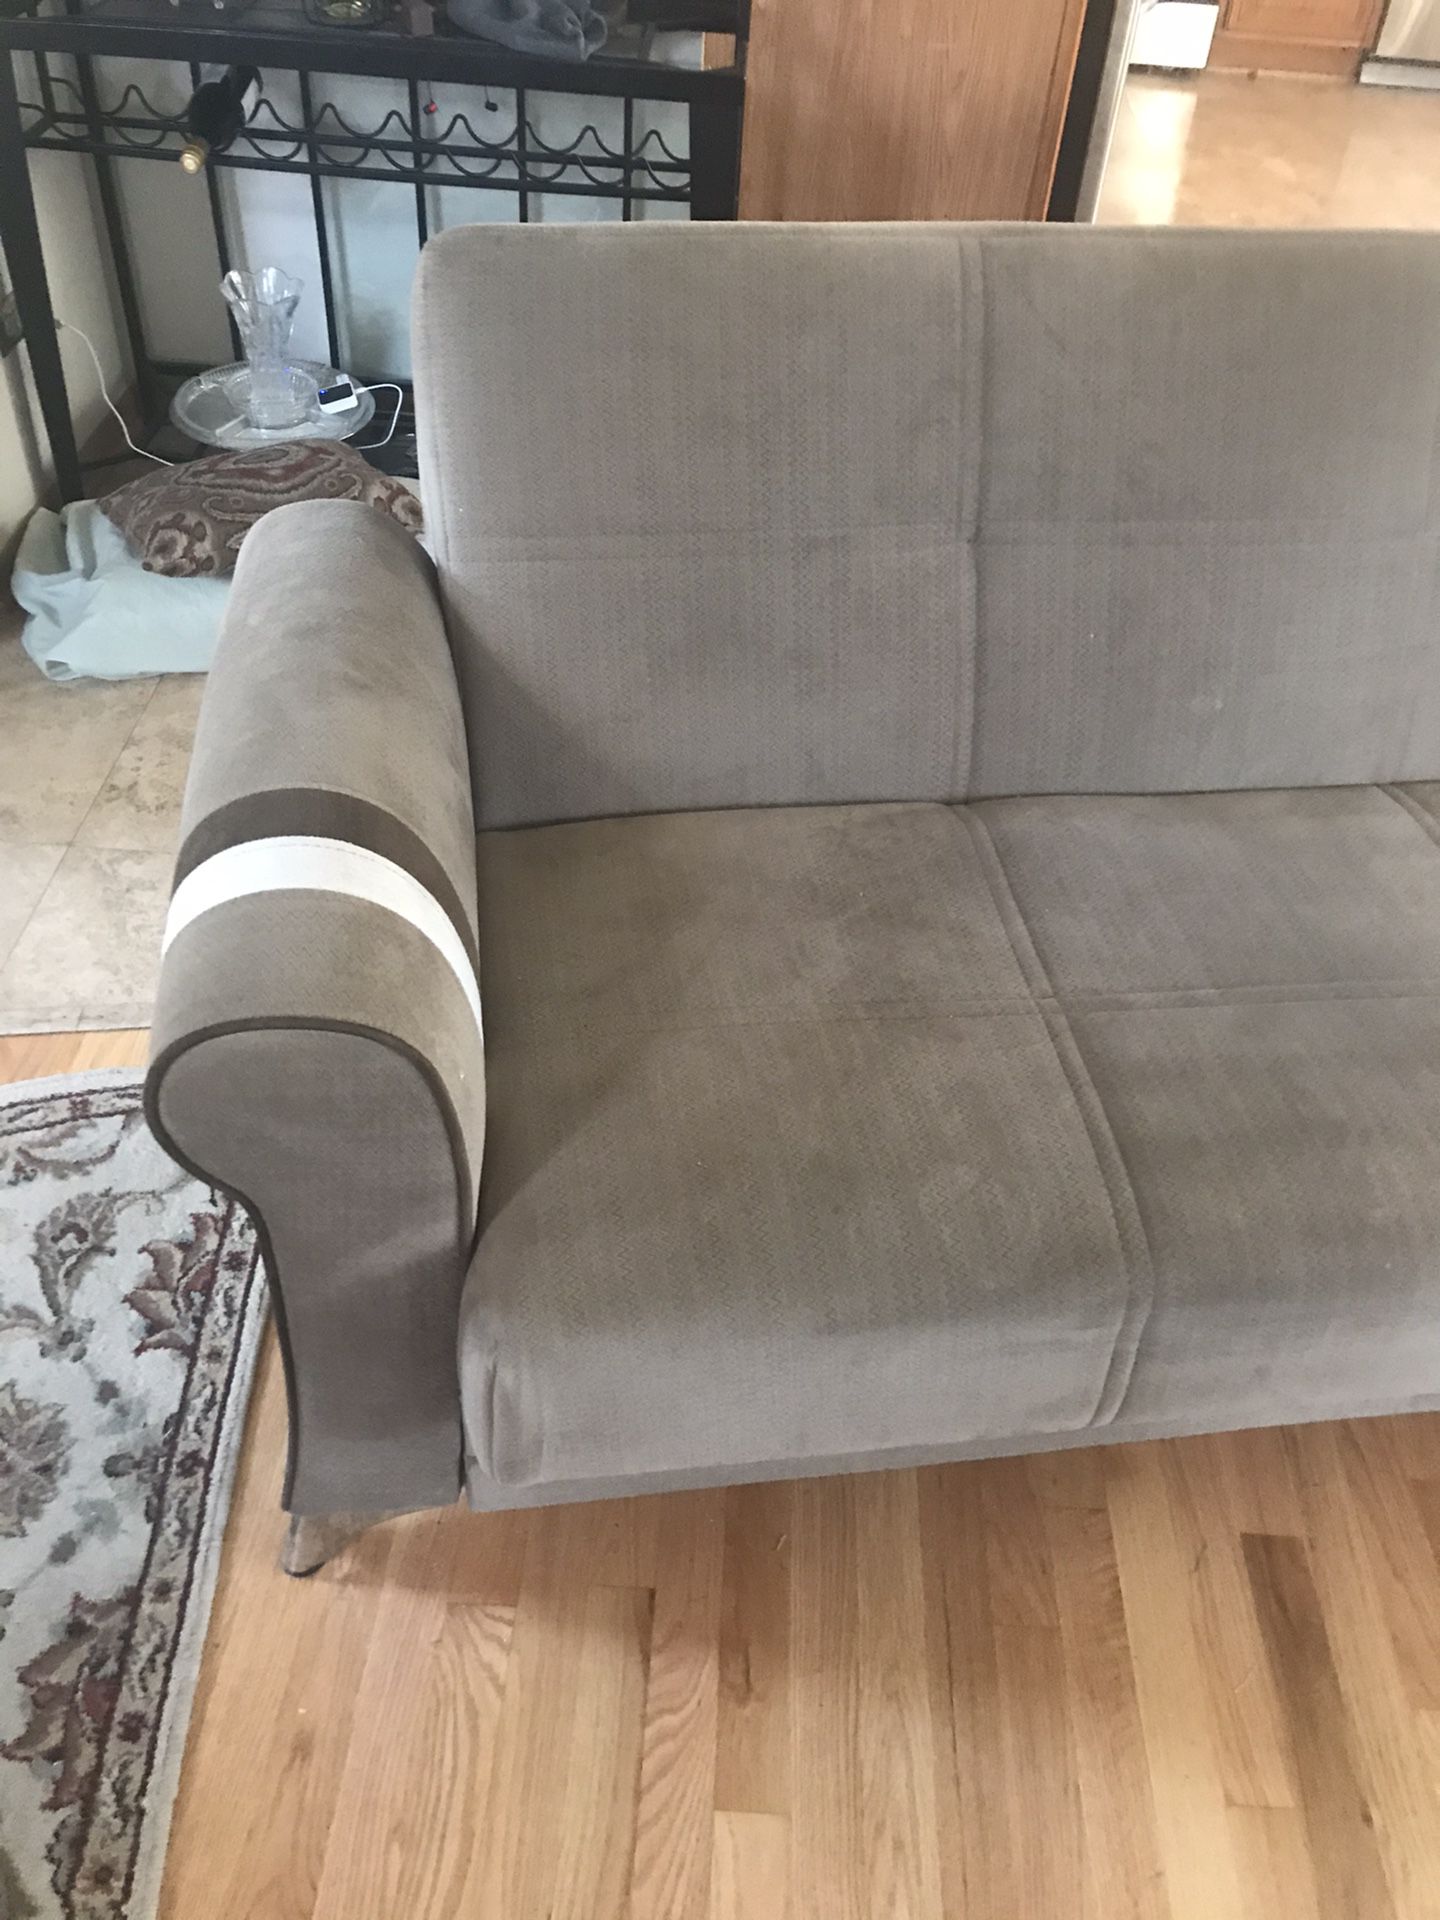 Folding Couch 